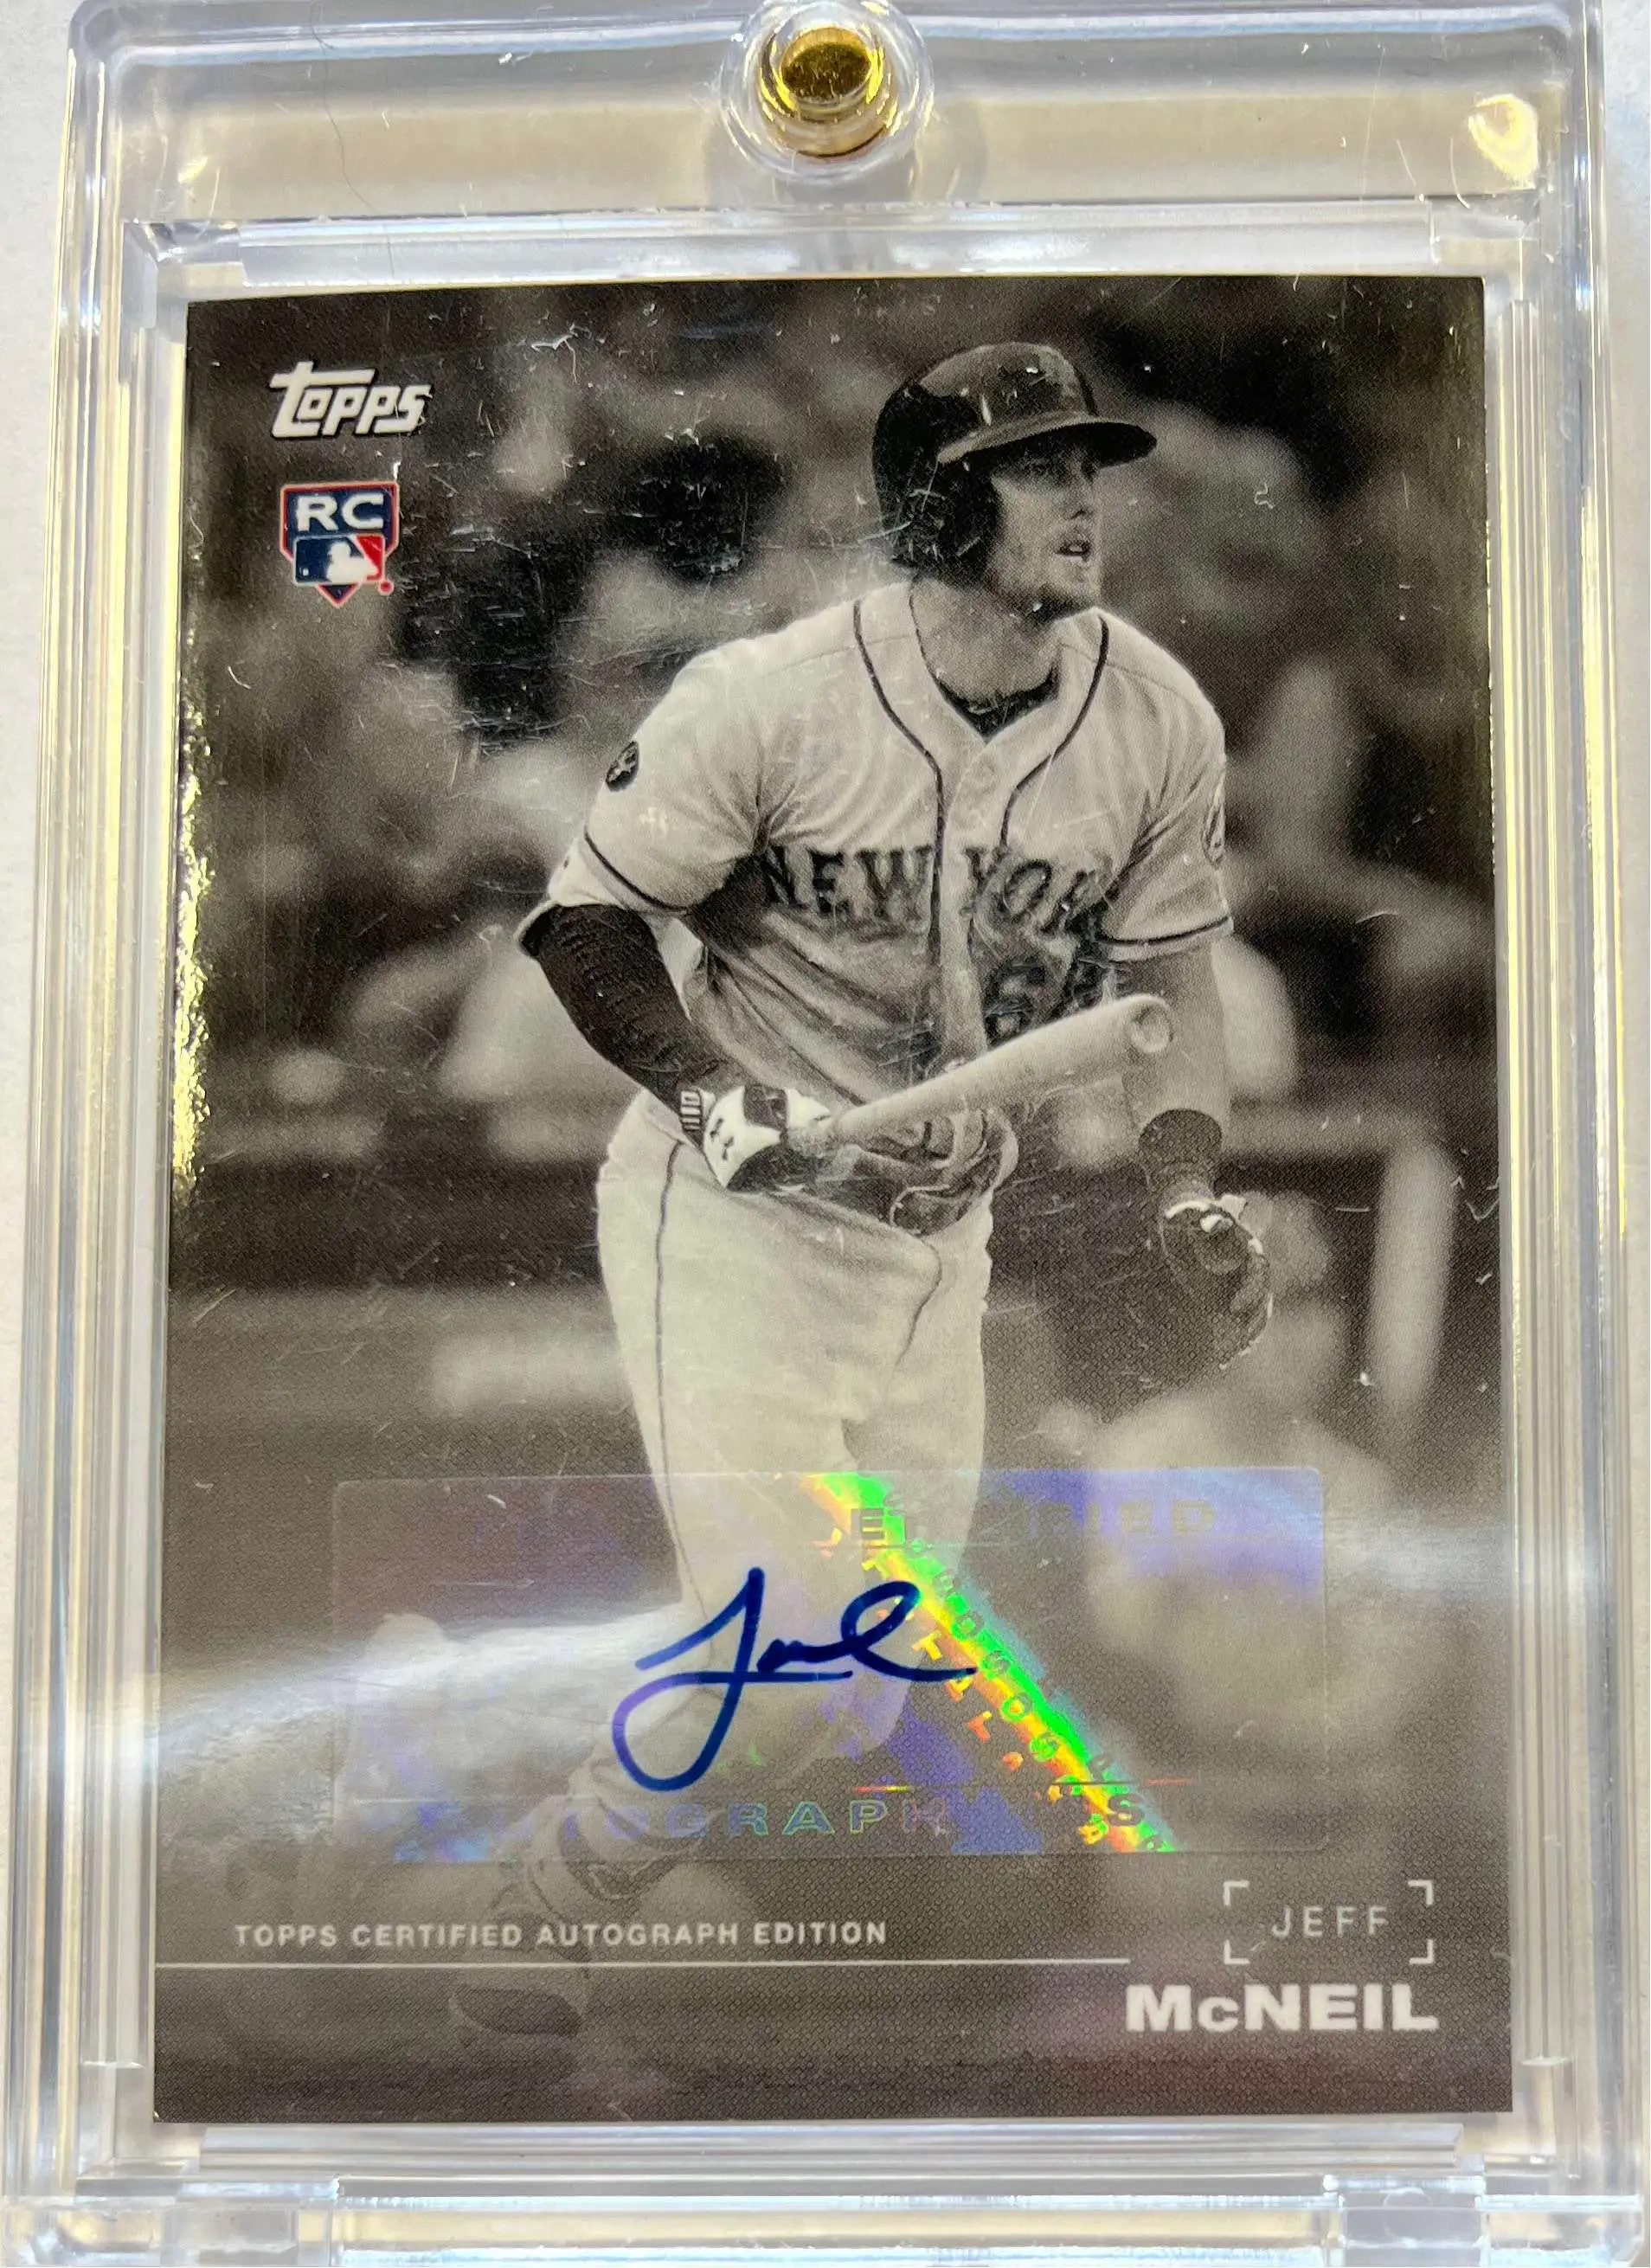 Jeff McNeil Trading Cards: Values, Tracking & Hot Deals